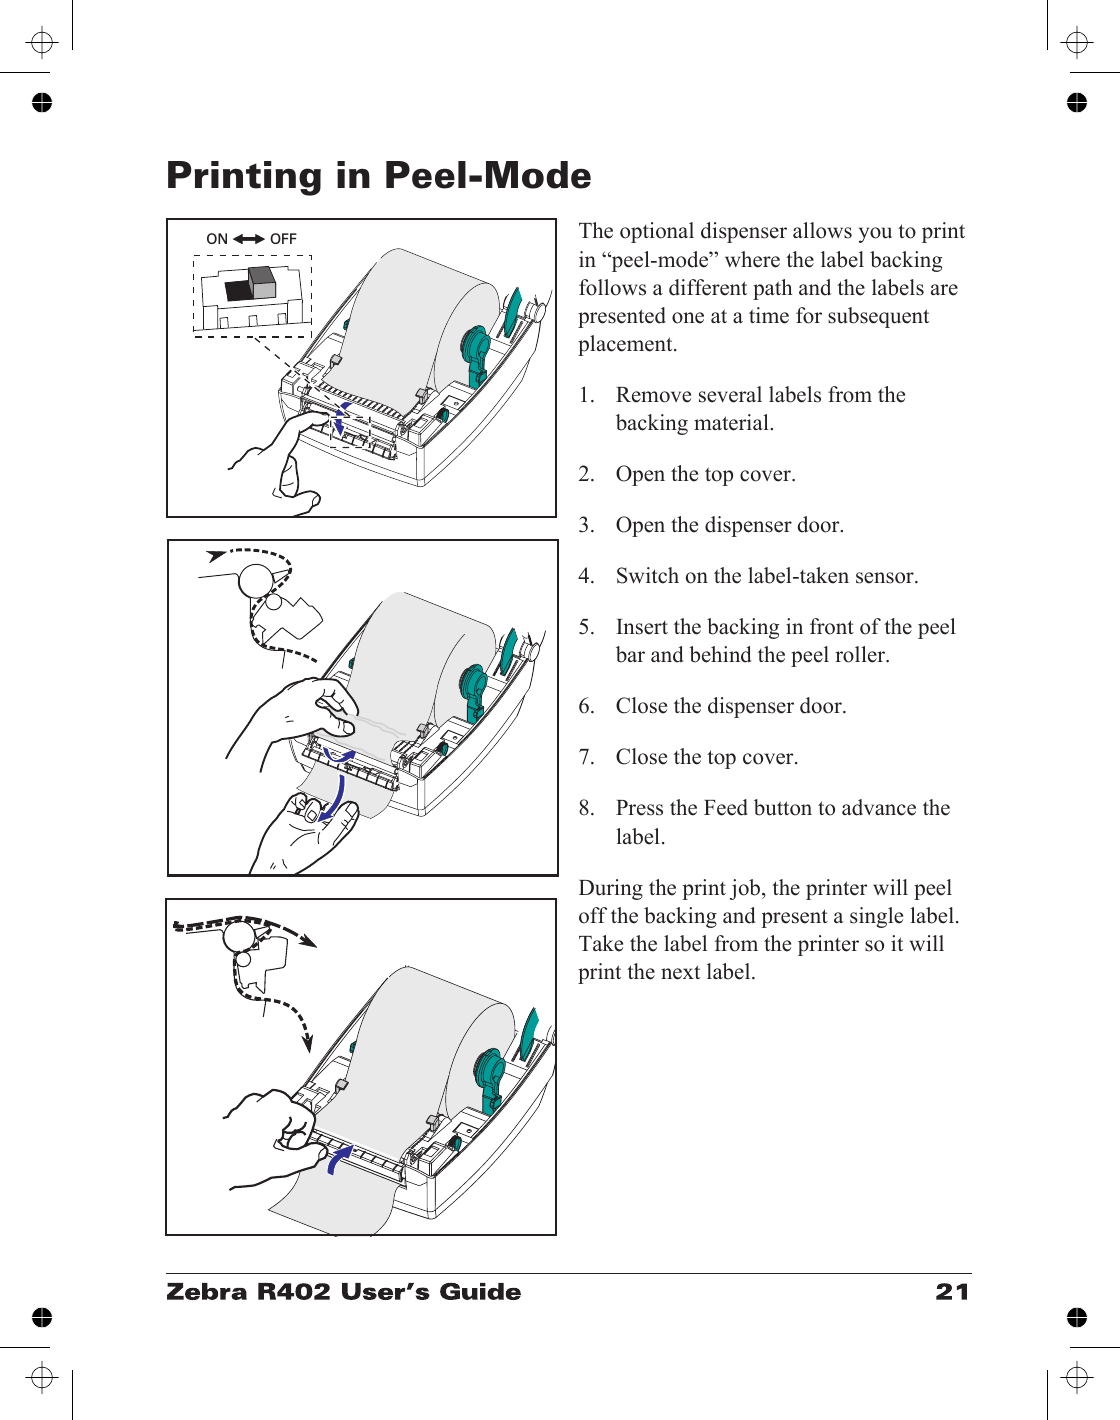 Printing in Peel-ModeThe optional dispenser allows you to printin “peel-mode” where the label backingfollows a different path and the labels arepresented one at a time for subsequentplacement.1. Remove several labels from thebacking material.2. Open the top cover.3. Open the dispenser door.4. Switch on the label-taken sensor.5. Insert the backing in front of the peelbar and behind the peel roller.6. Close the dispenser door.7. Close the top cover.8. Press the Feed button to advance thelabel.During the print job, the printer will peeloff the backing and present a single label.Take the label from the printer so it willprint the next label.ON OFF